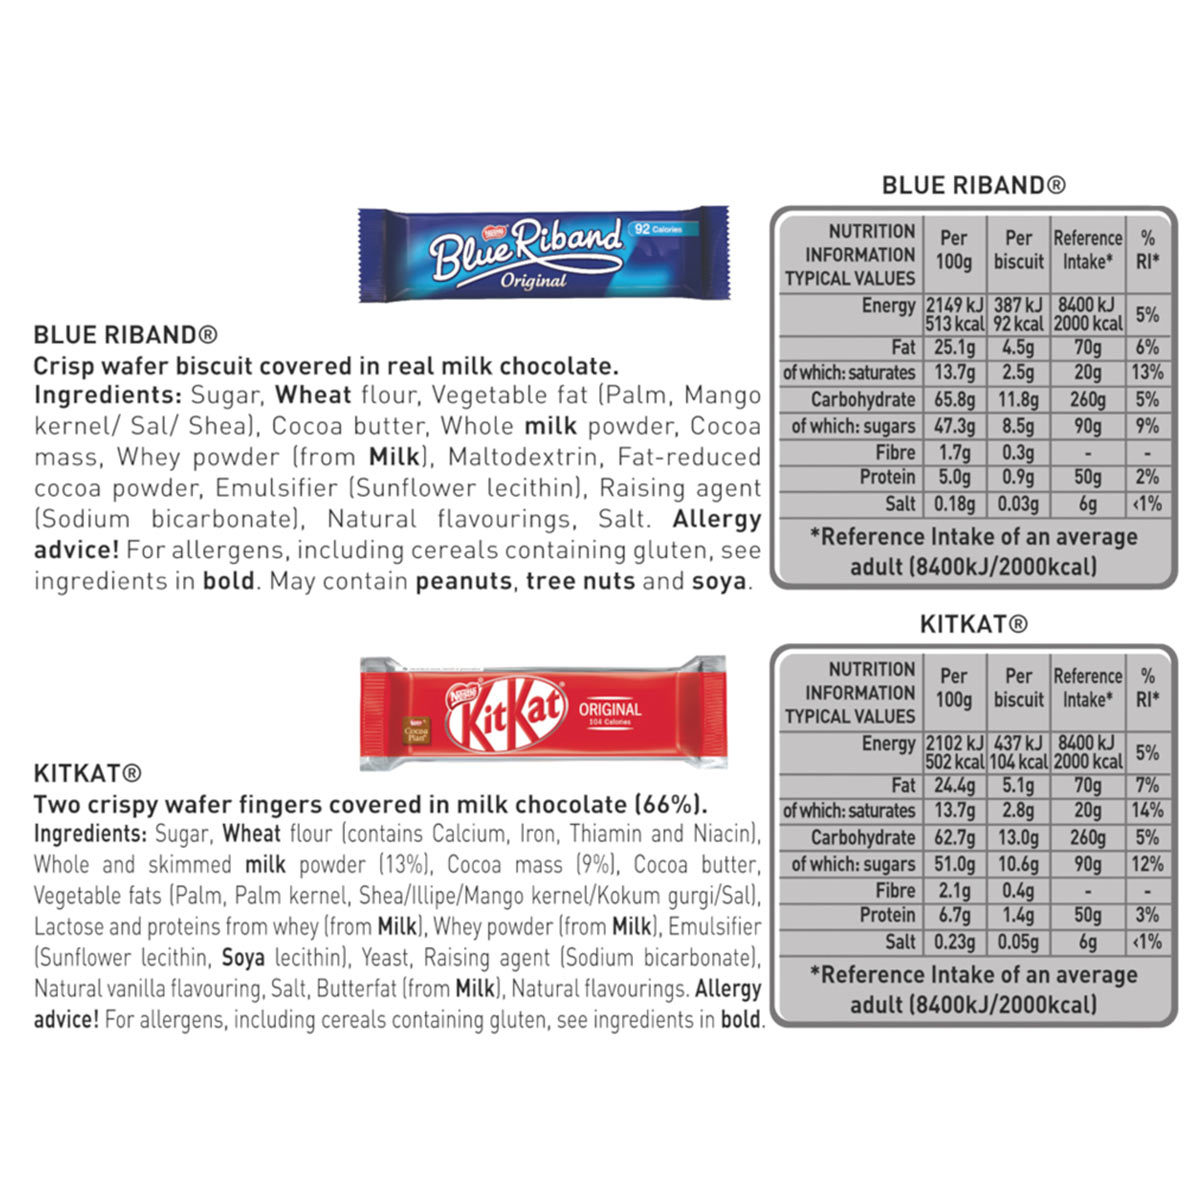 Image showing the ingrediants and nutritional information for the contents